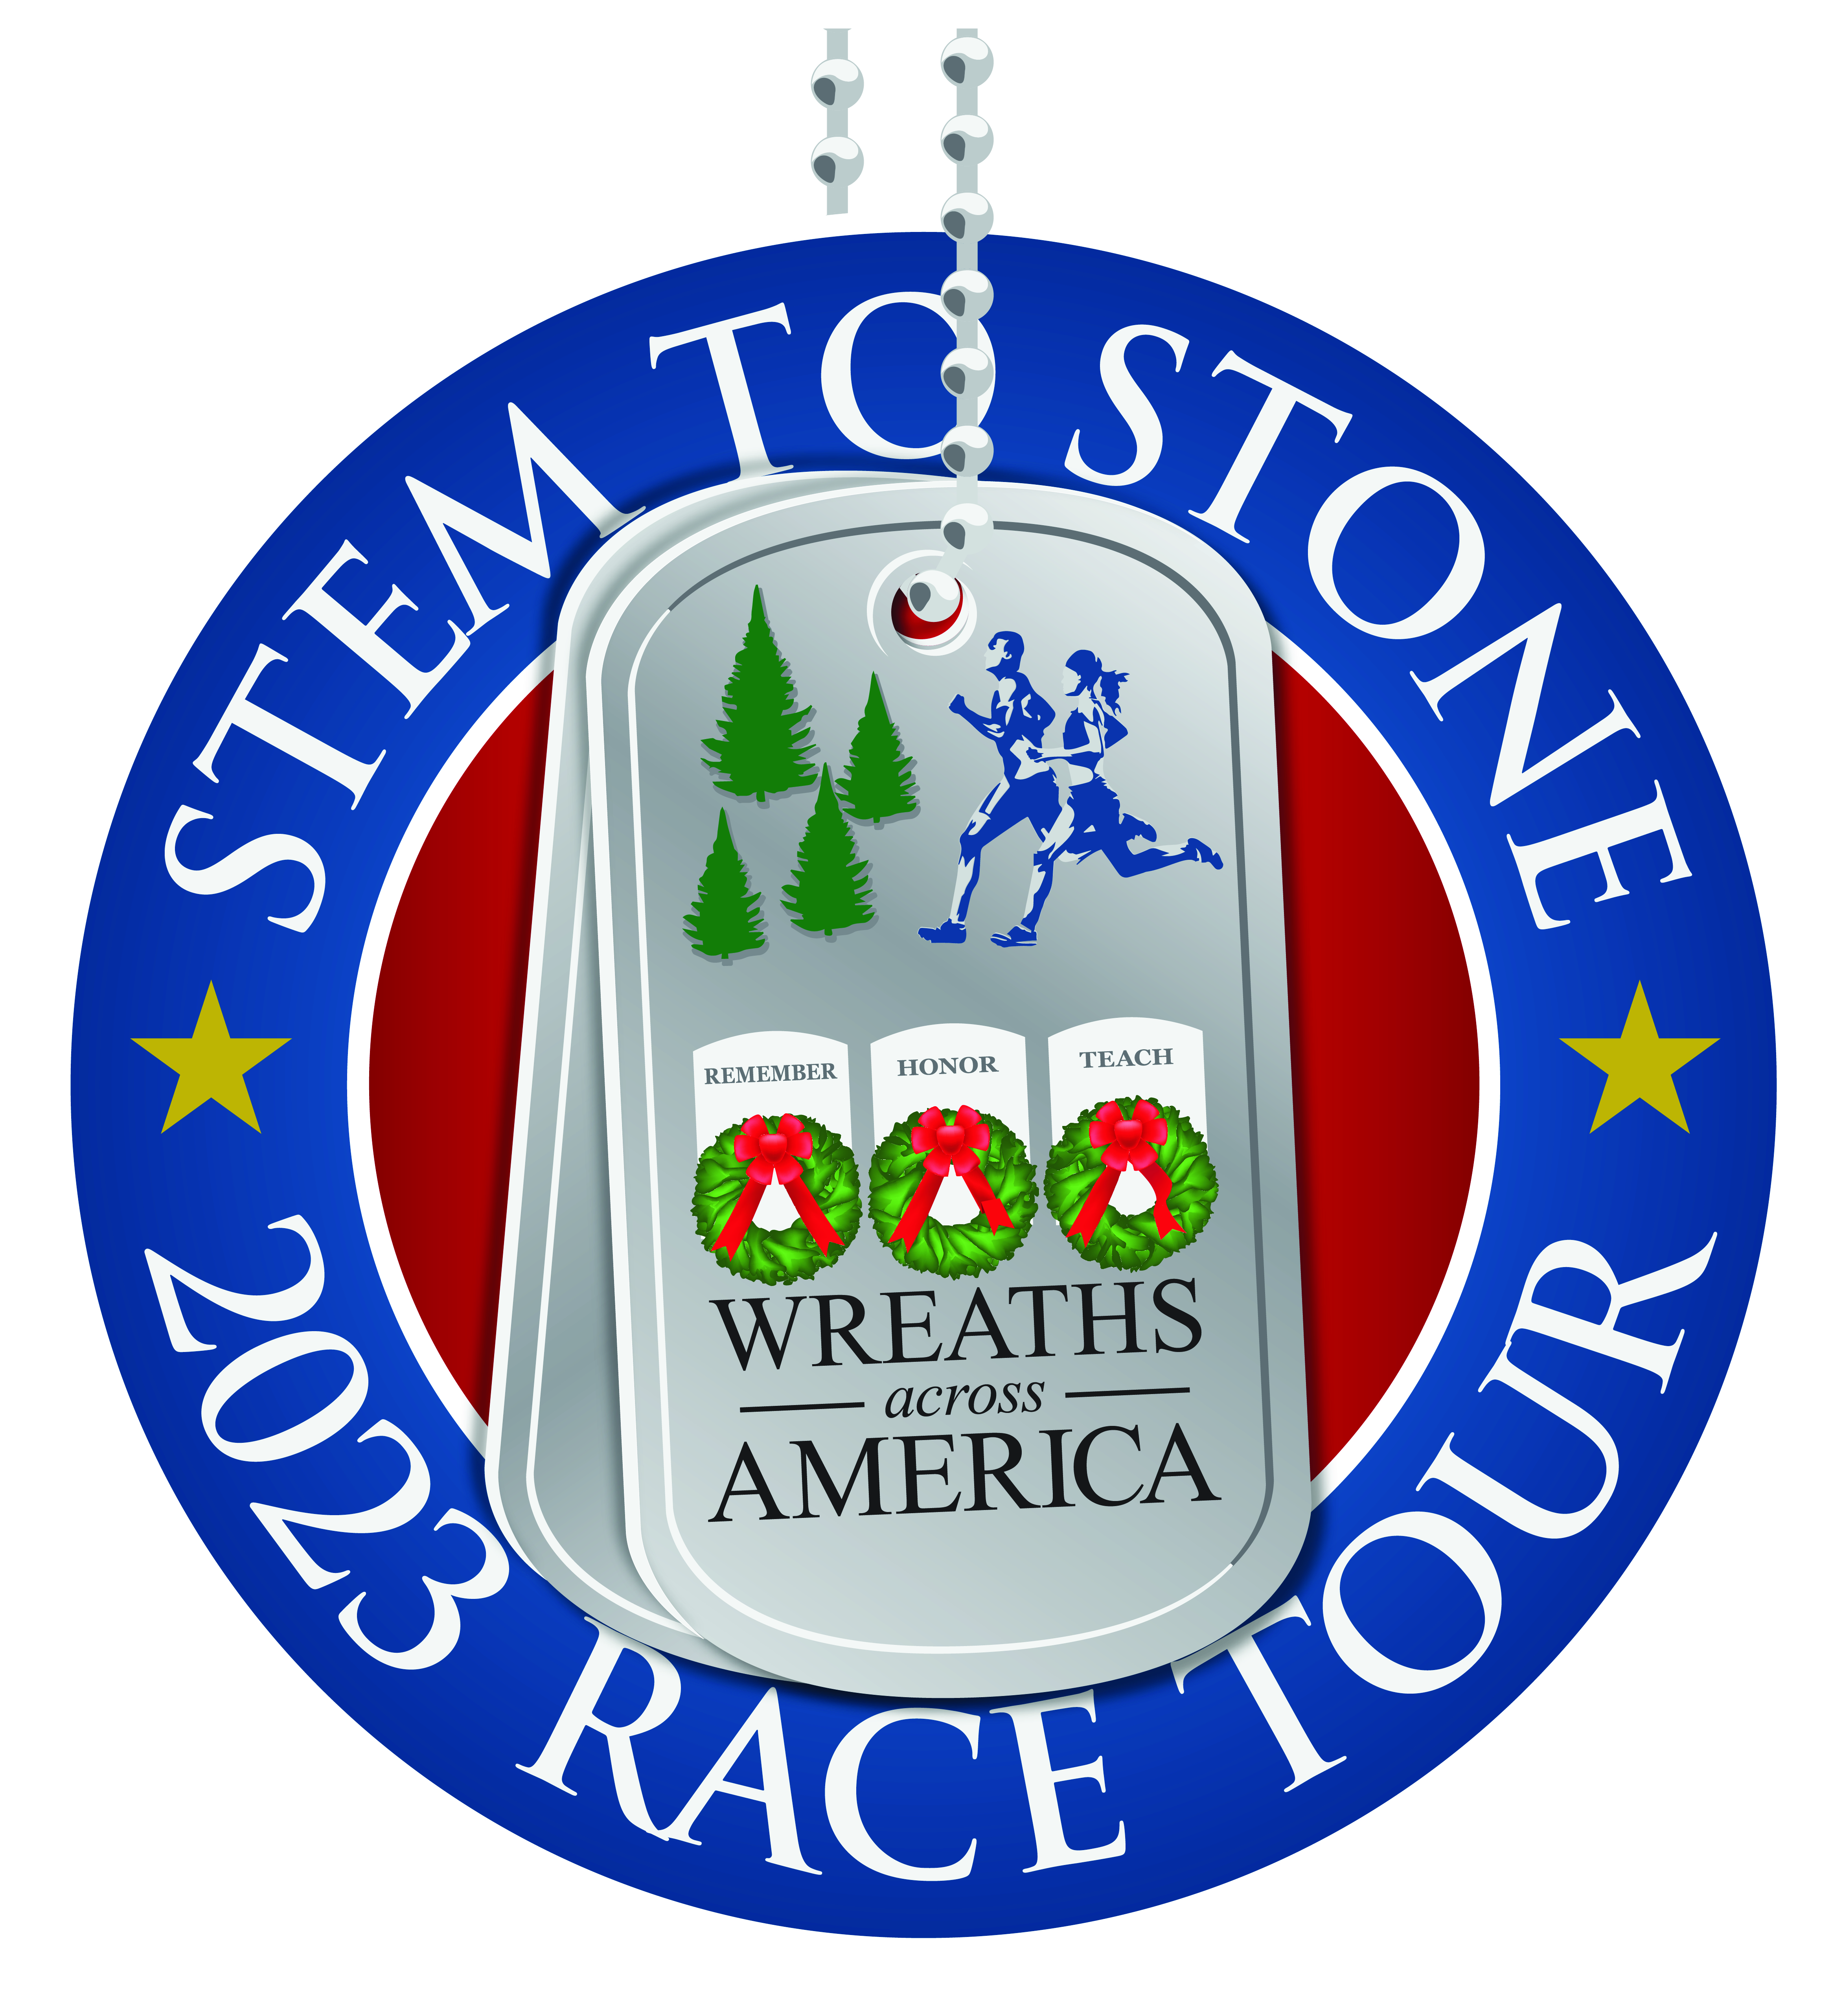 Registration is Open for the 5th Annual Wreaths Across America  Stem to Stone Races